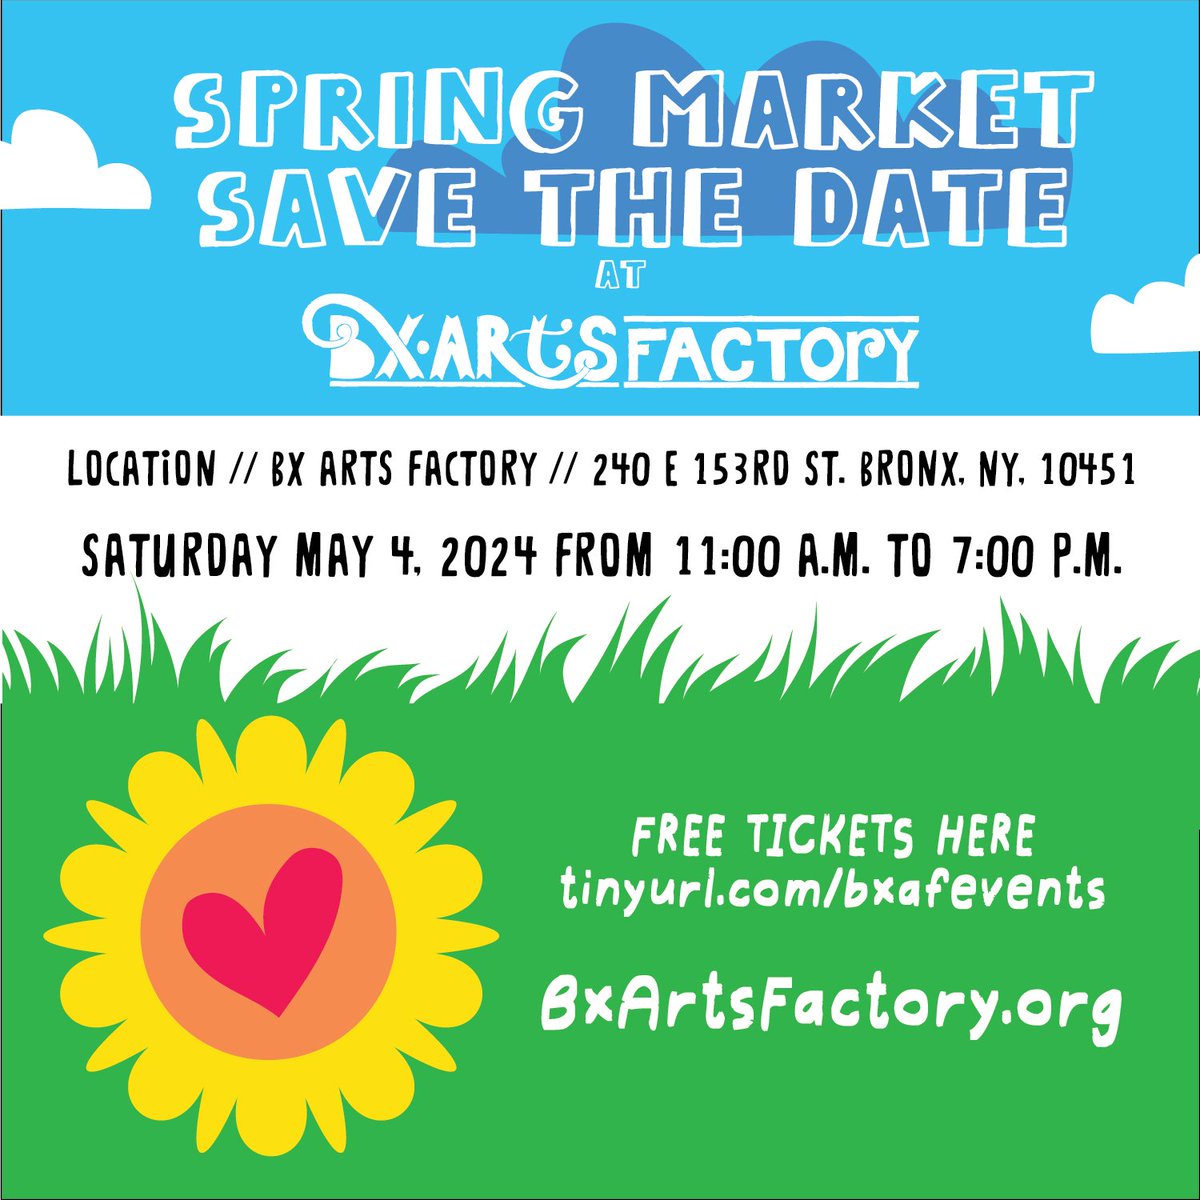 Welcome to the Spring Artist Market! Join us in person at BxArts Factory for a day filled with creativity and inspiration. Discover unique artworks and handmade crafts from talented local artists. Whether you're looking for a new piece to decorate your home or searching for a